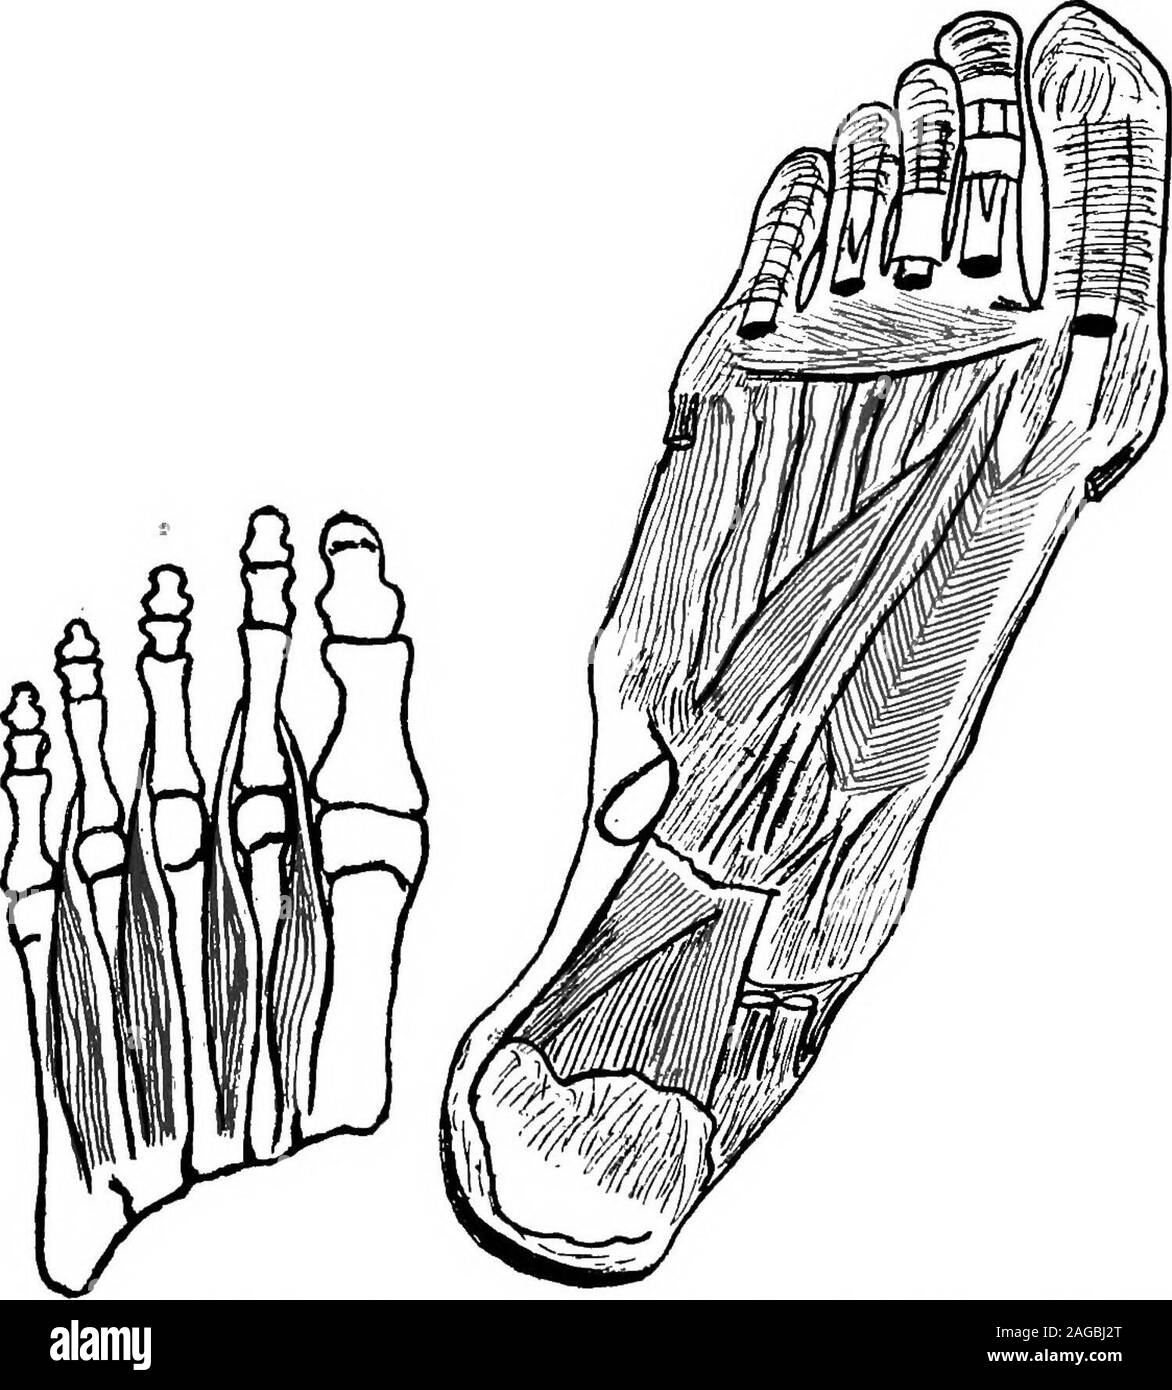 . A manual on foot care and shoe fitting for officers of the U.S. Navy and U.S. Marine corps. Fig. 3.—Muscles con- Pig. 4.-e-Deep muscles of foot. Muscles trolling lateral toe action. and tendons controlling toe action. (C««-{Cunningham.) ningham.) metatarsal bone. (See illustration No. 2.) Thig is definitelyformed by the inherent structural concavity of the bones held 12 FOOT CARE AND SHOE FITTING among themselves by ligaments and supported from below bydeveloped muscle layers. The anterior arch is formed by the distal ends of the meta-tarsal bones. (SeeillustrationNo. s.) The muscular develo Stock Photo